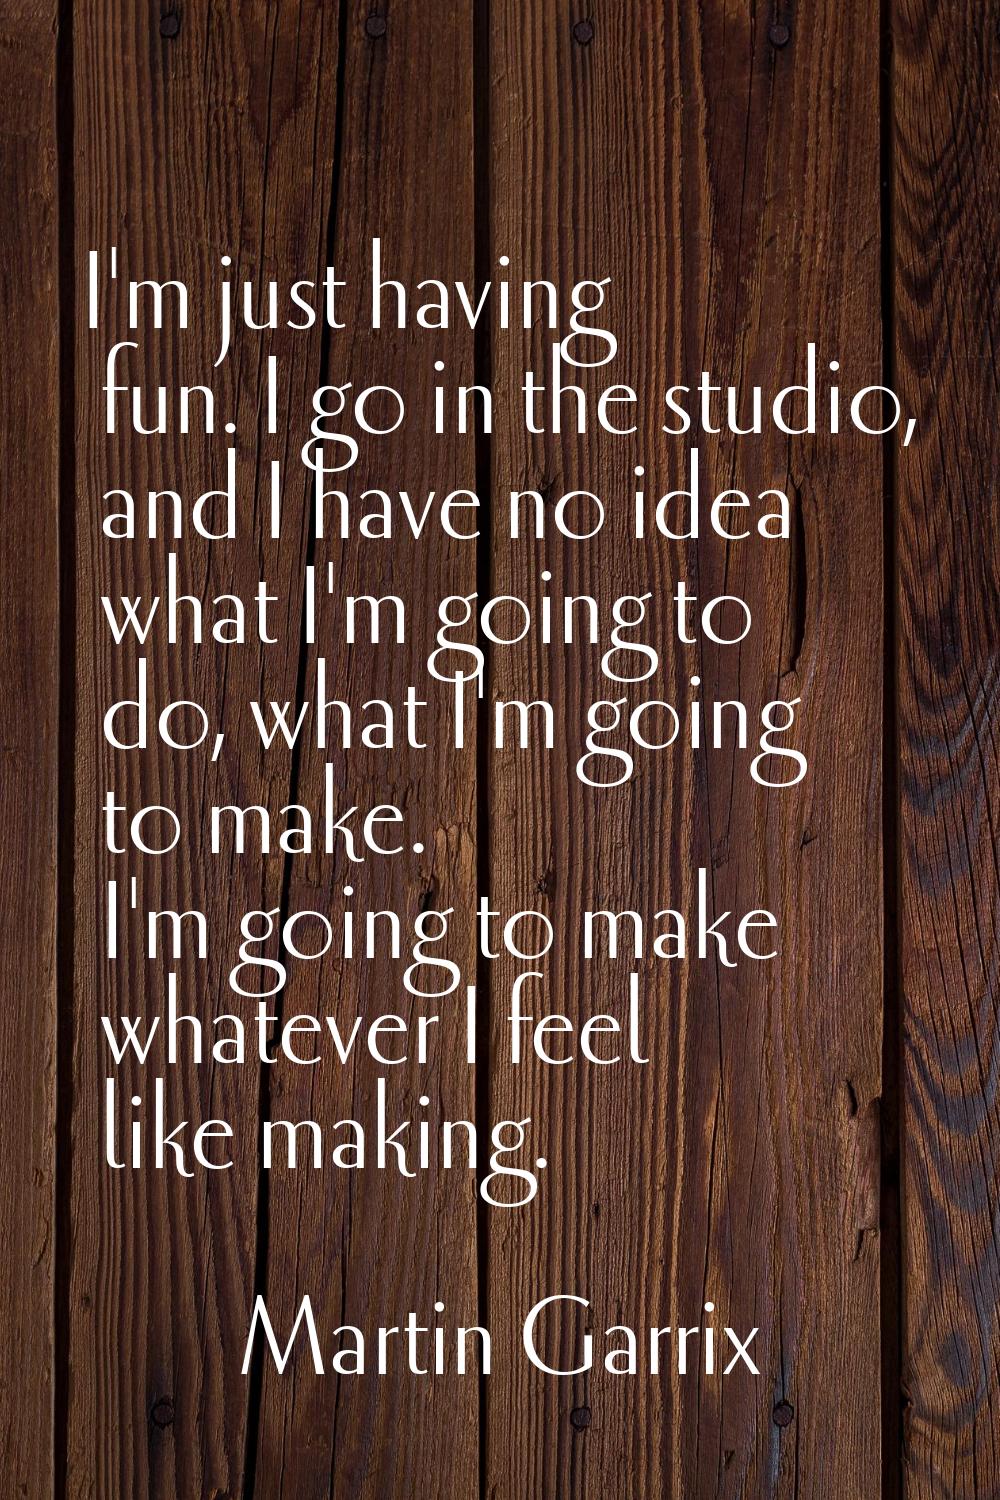 I'm just having fun. I go in the studio, and I have no idea what I'm going to do, what I'm going to